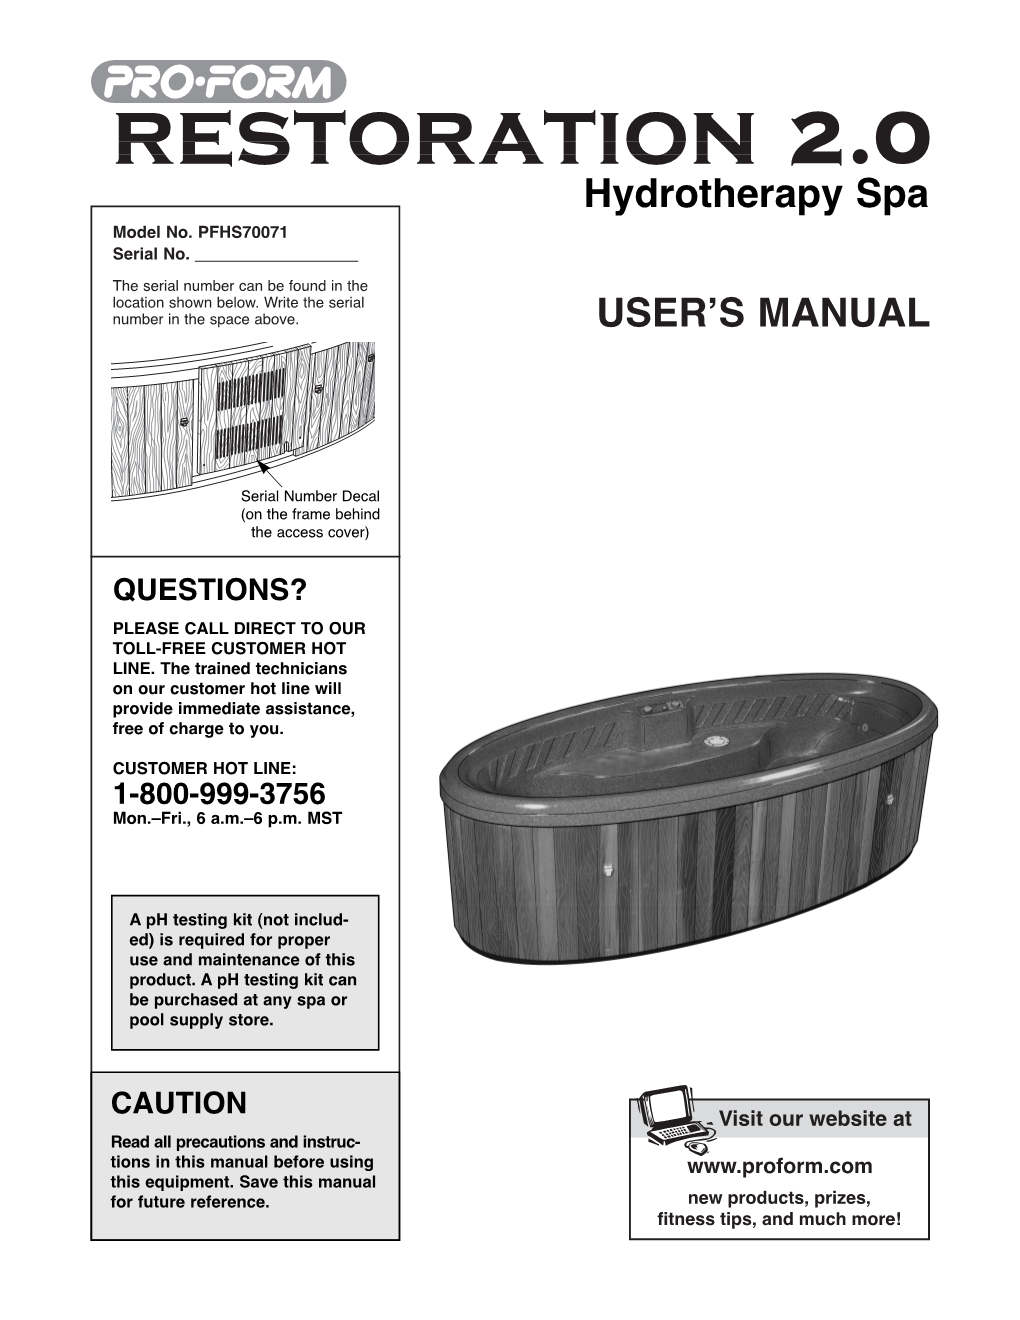 USER's MANUAL Hydrotherapy